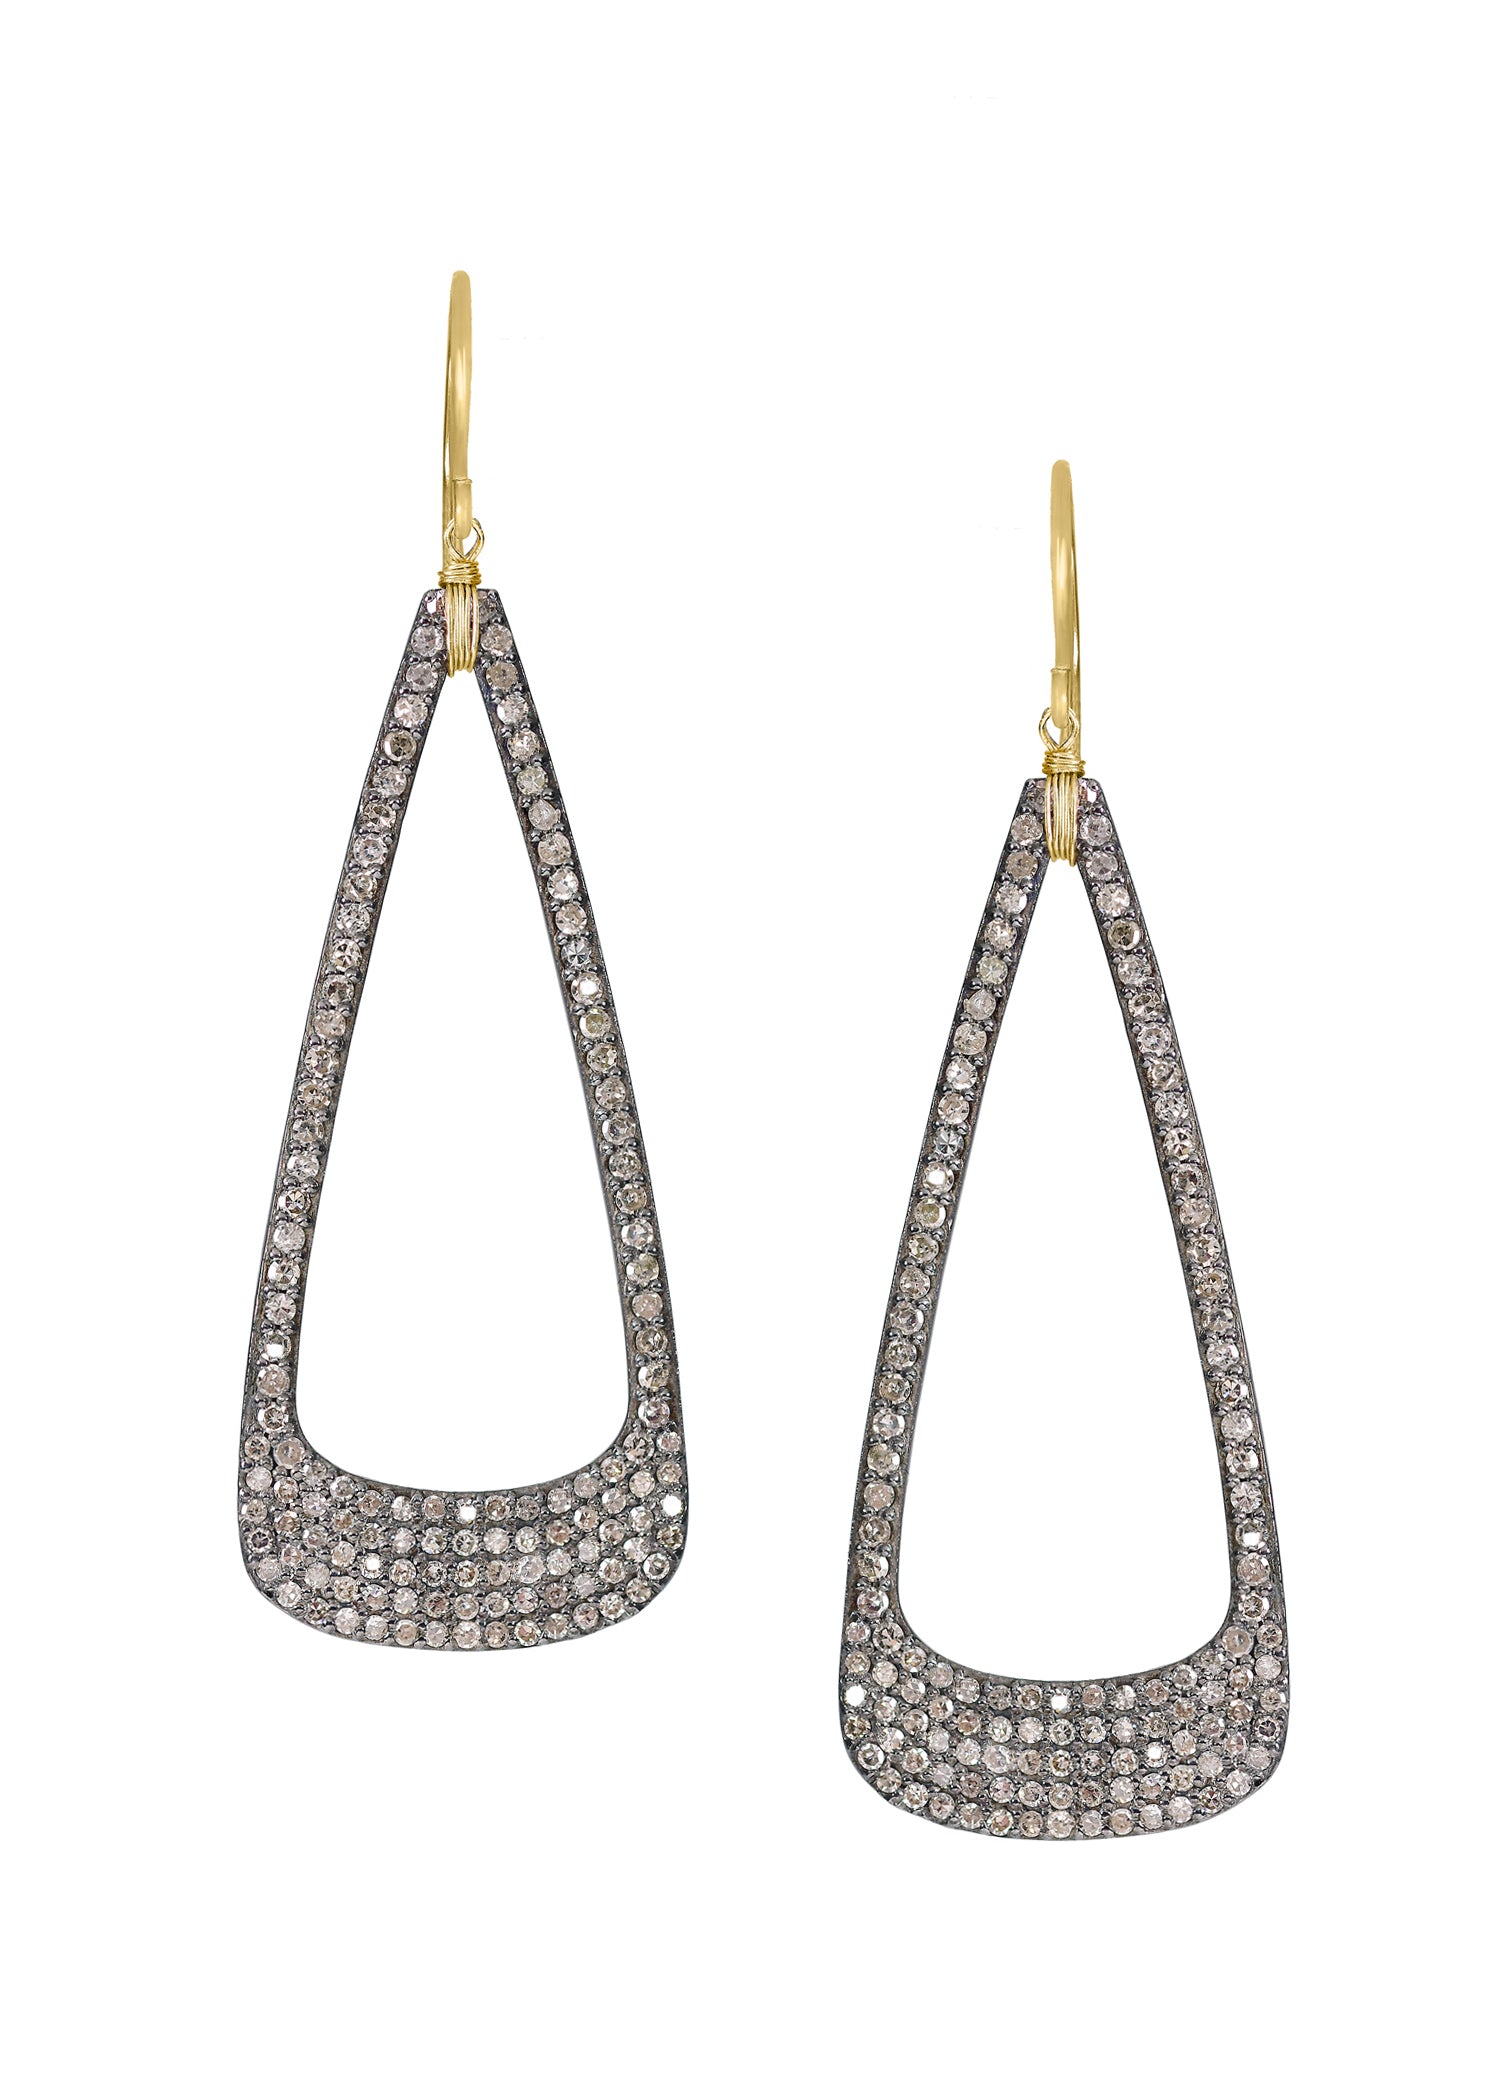 Diamond 14k gold Sterling silver Mixed metal Special order only Earrings measure 2-3/8" in length (including the ear wires) and 13/16" in width at the widest point Handmade in our Los Angeles studio